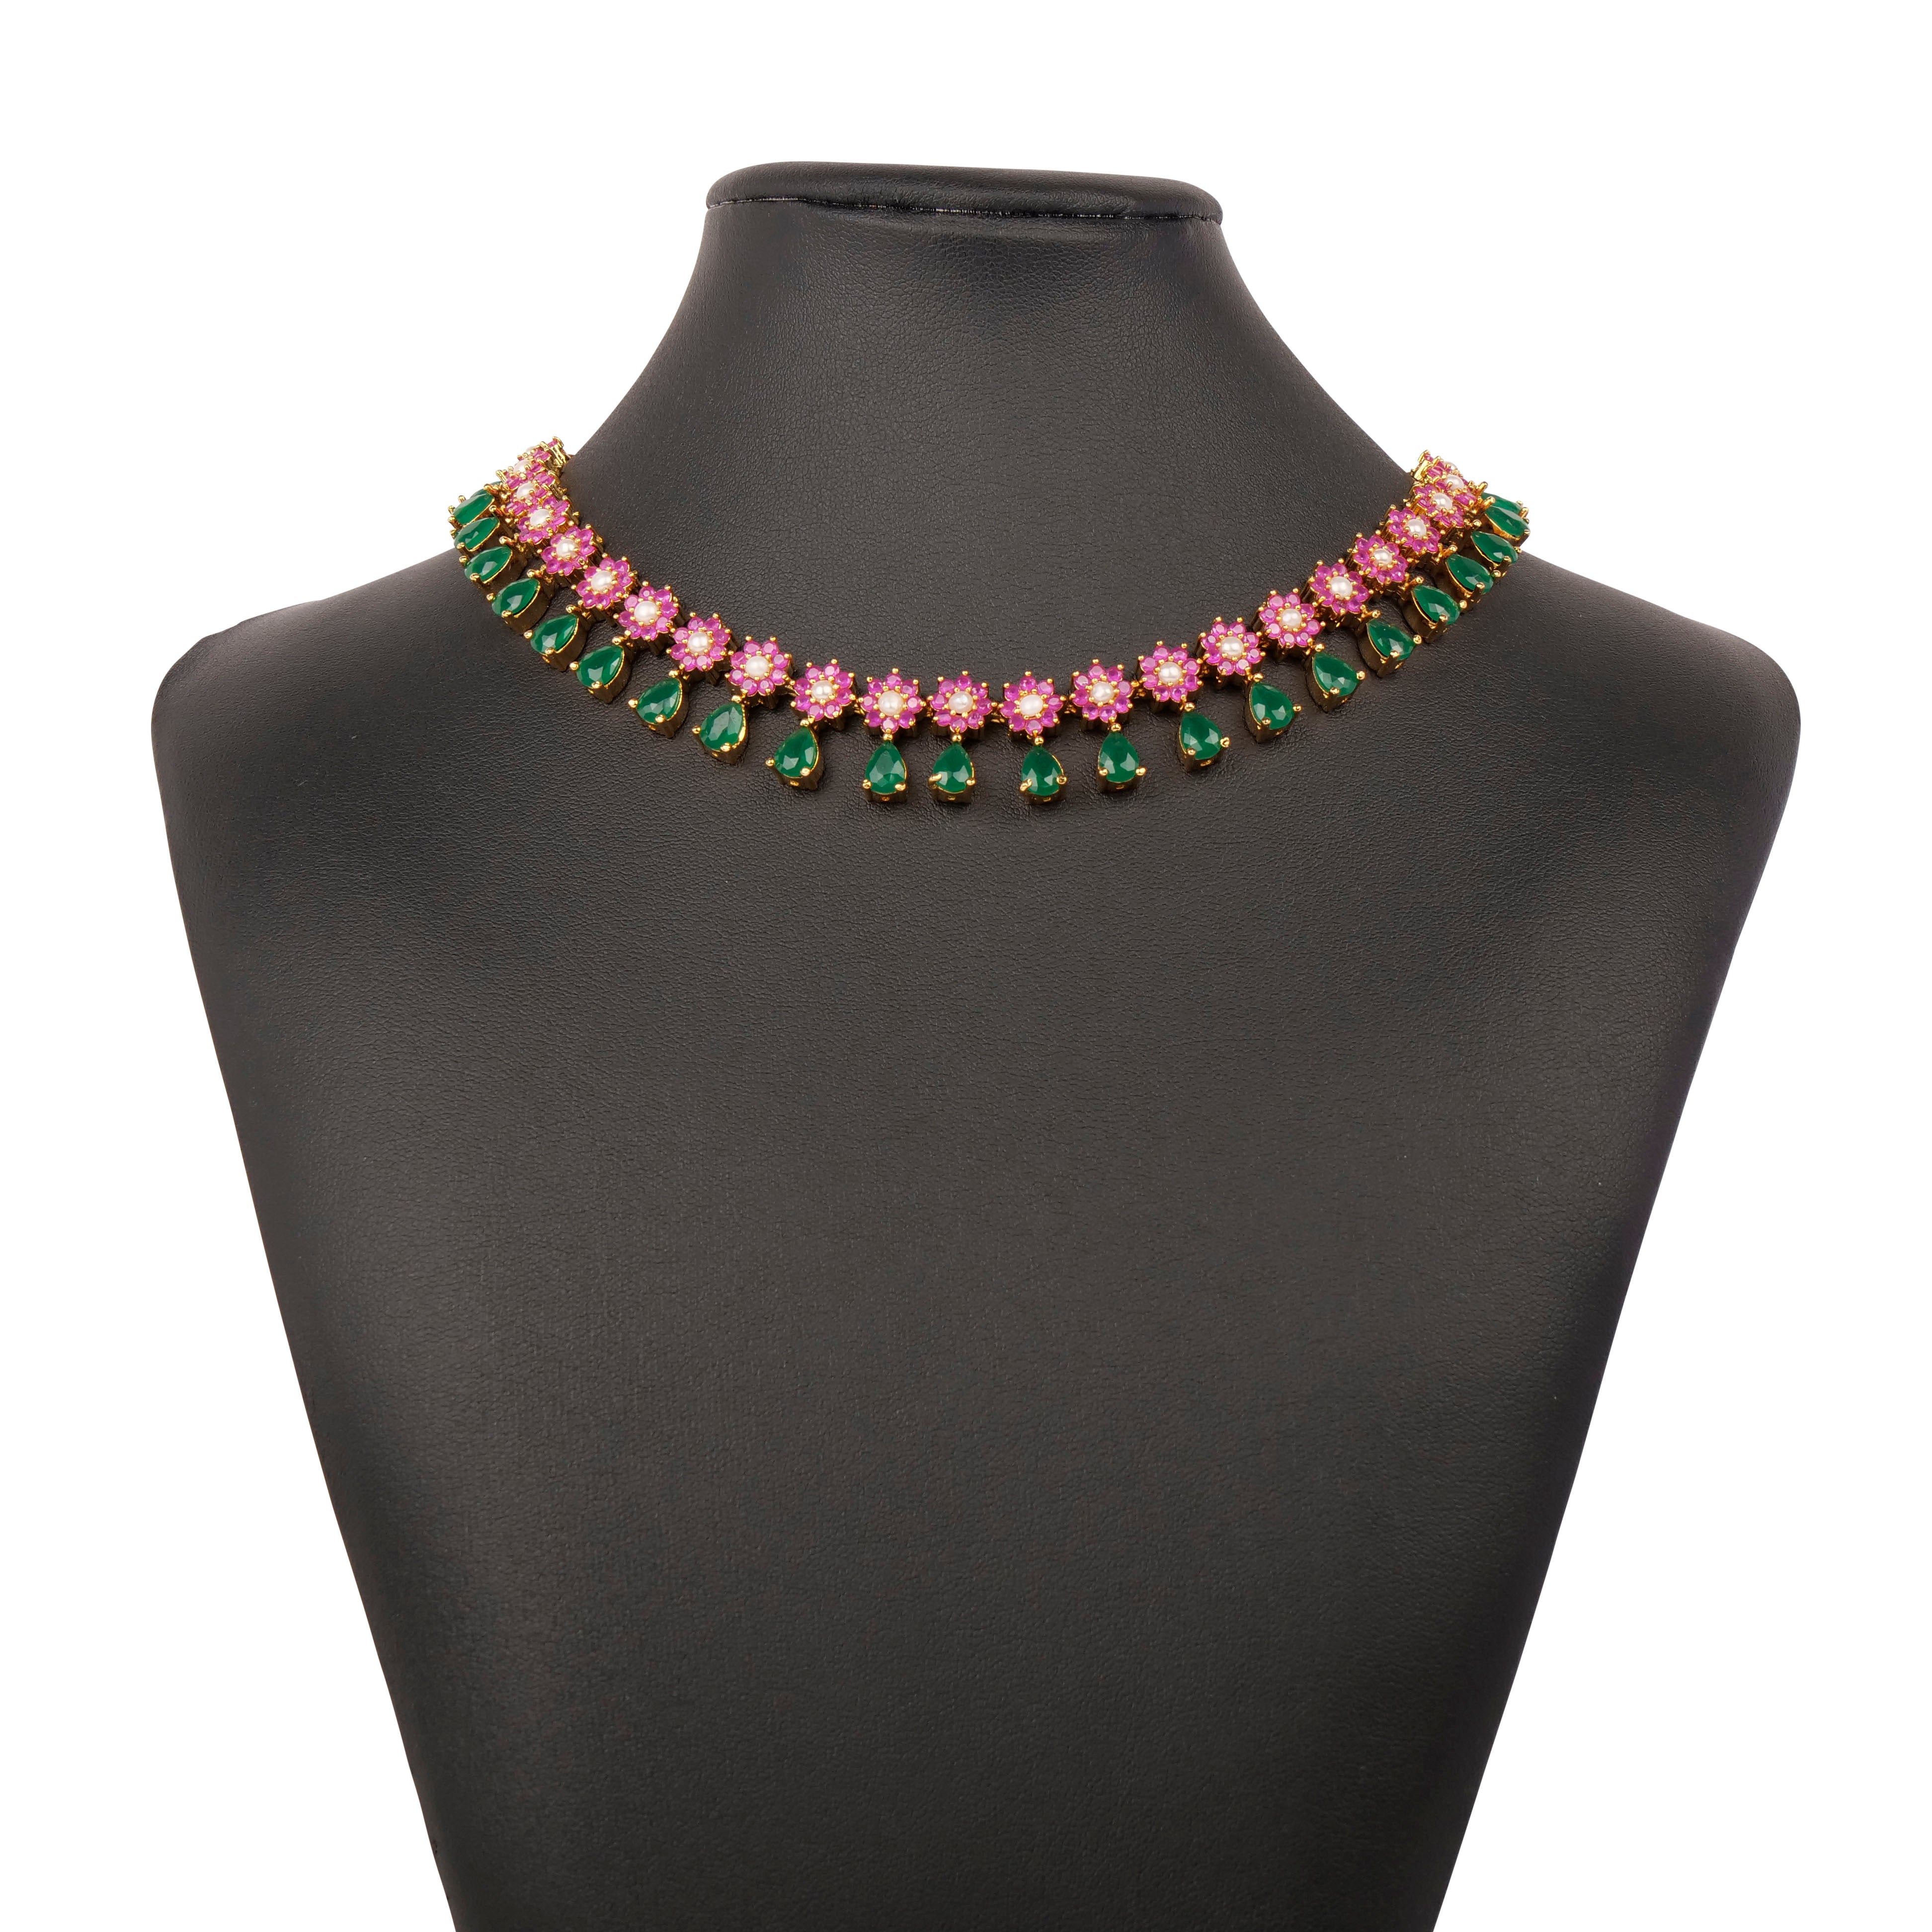 Neena Rajasthani Necklace Set in Ruby and Green